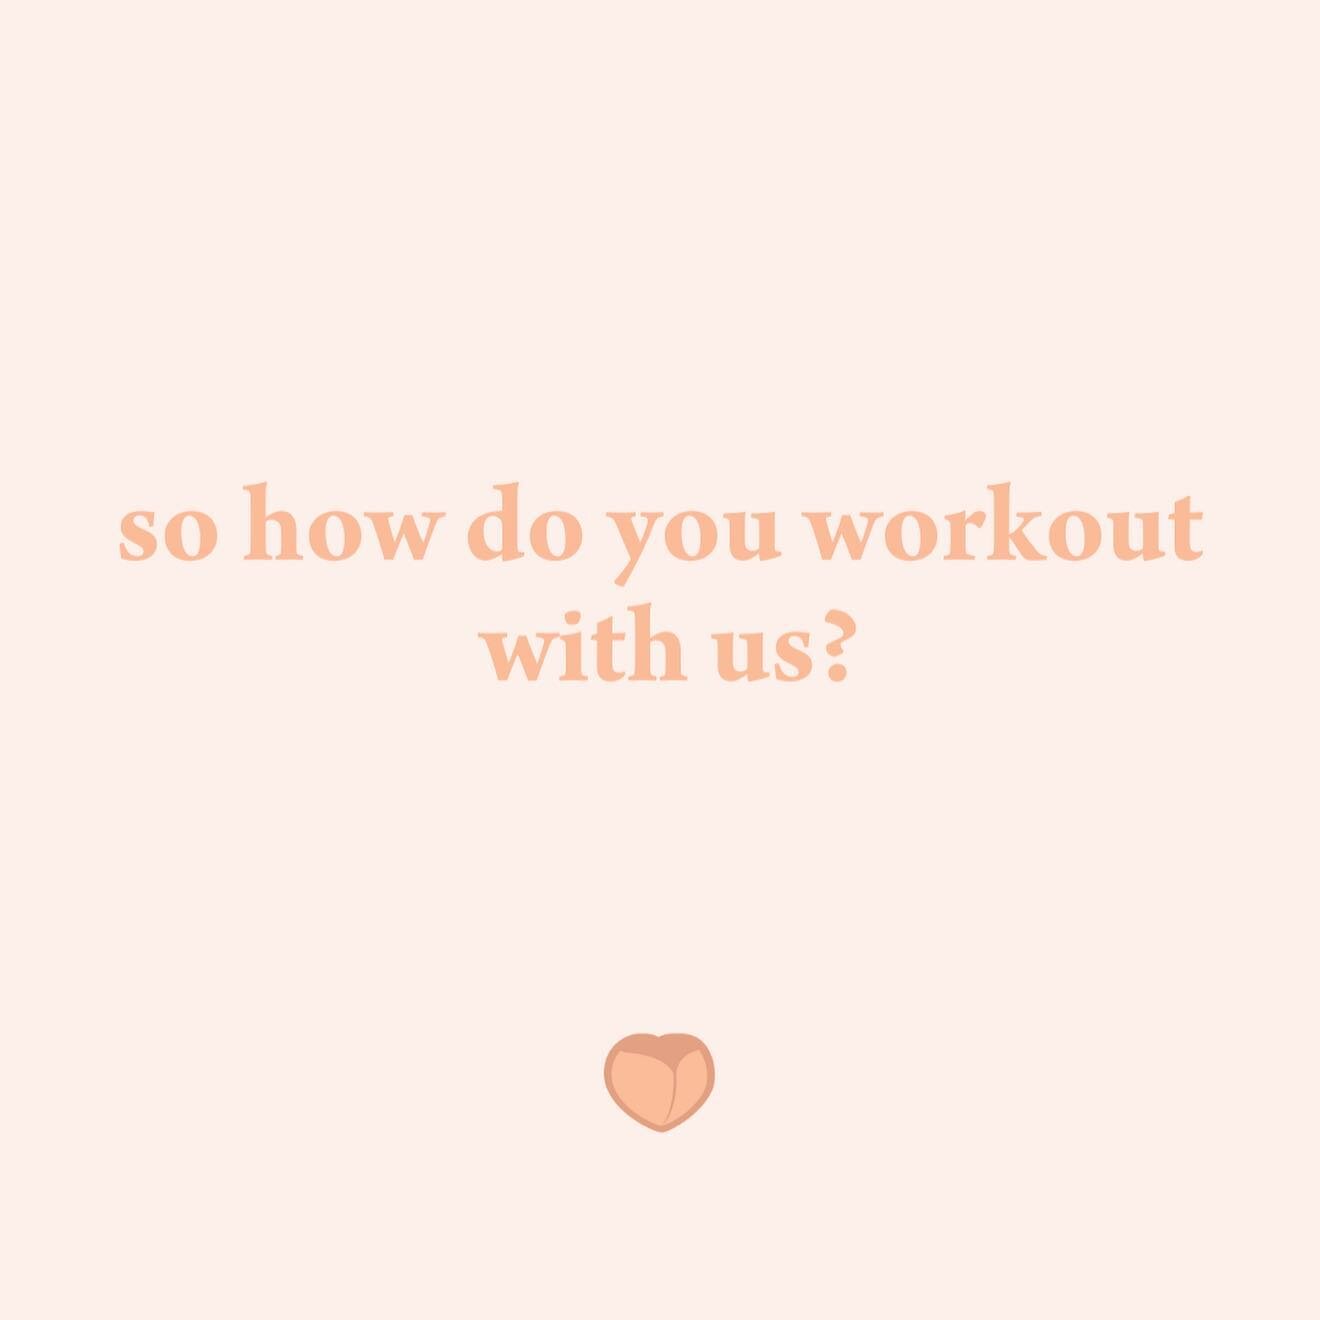 How do you join team booty and workout with us? 🍑
⠀⠀⠀⠀⠀⠀⠀⠀⠀
There are two ways you can train with us.
⠀⠀⠀⠀⠀⠀⠀⠀⠀
We offer:
👯&zwj;♀️ semi private training (2-4 women per session)
or
🏋🏼&zwj;♀️ personal training (1:1 sessions)
⠀⠀⠀⠀⠀⠀⠀⠀⠀
Whether you&r